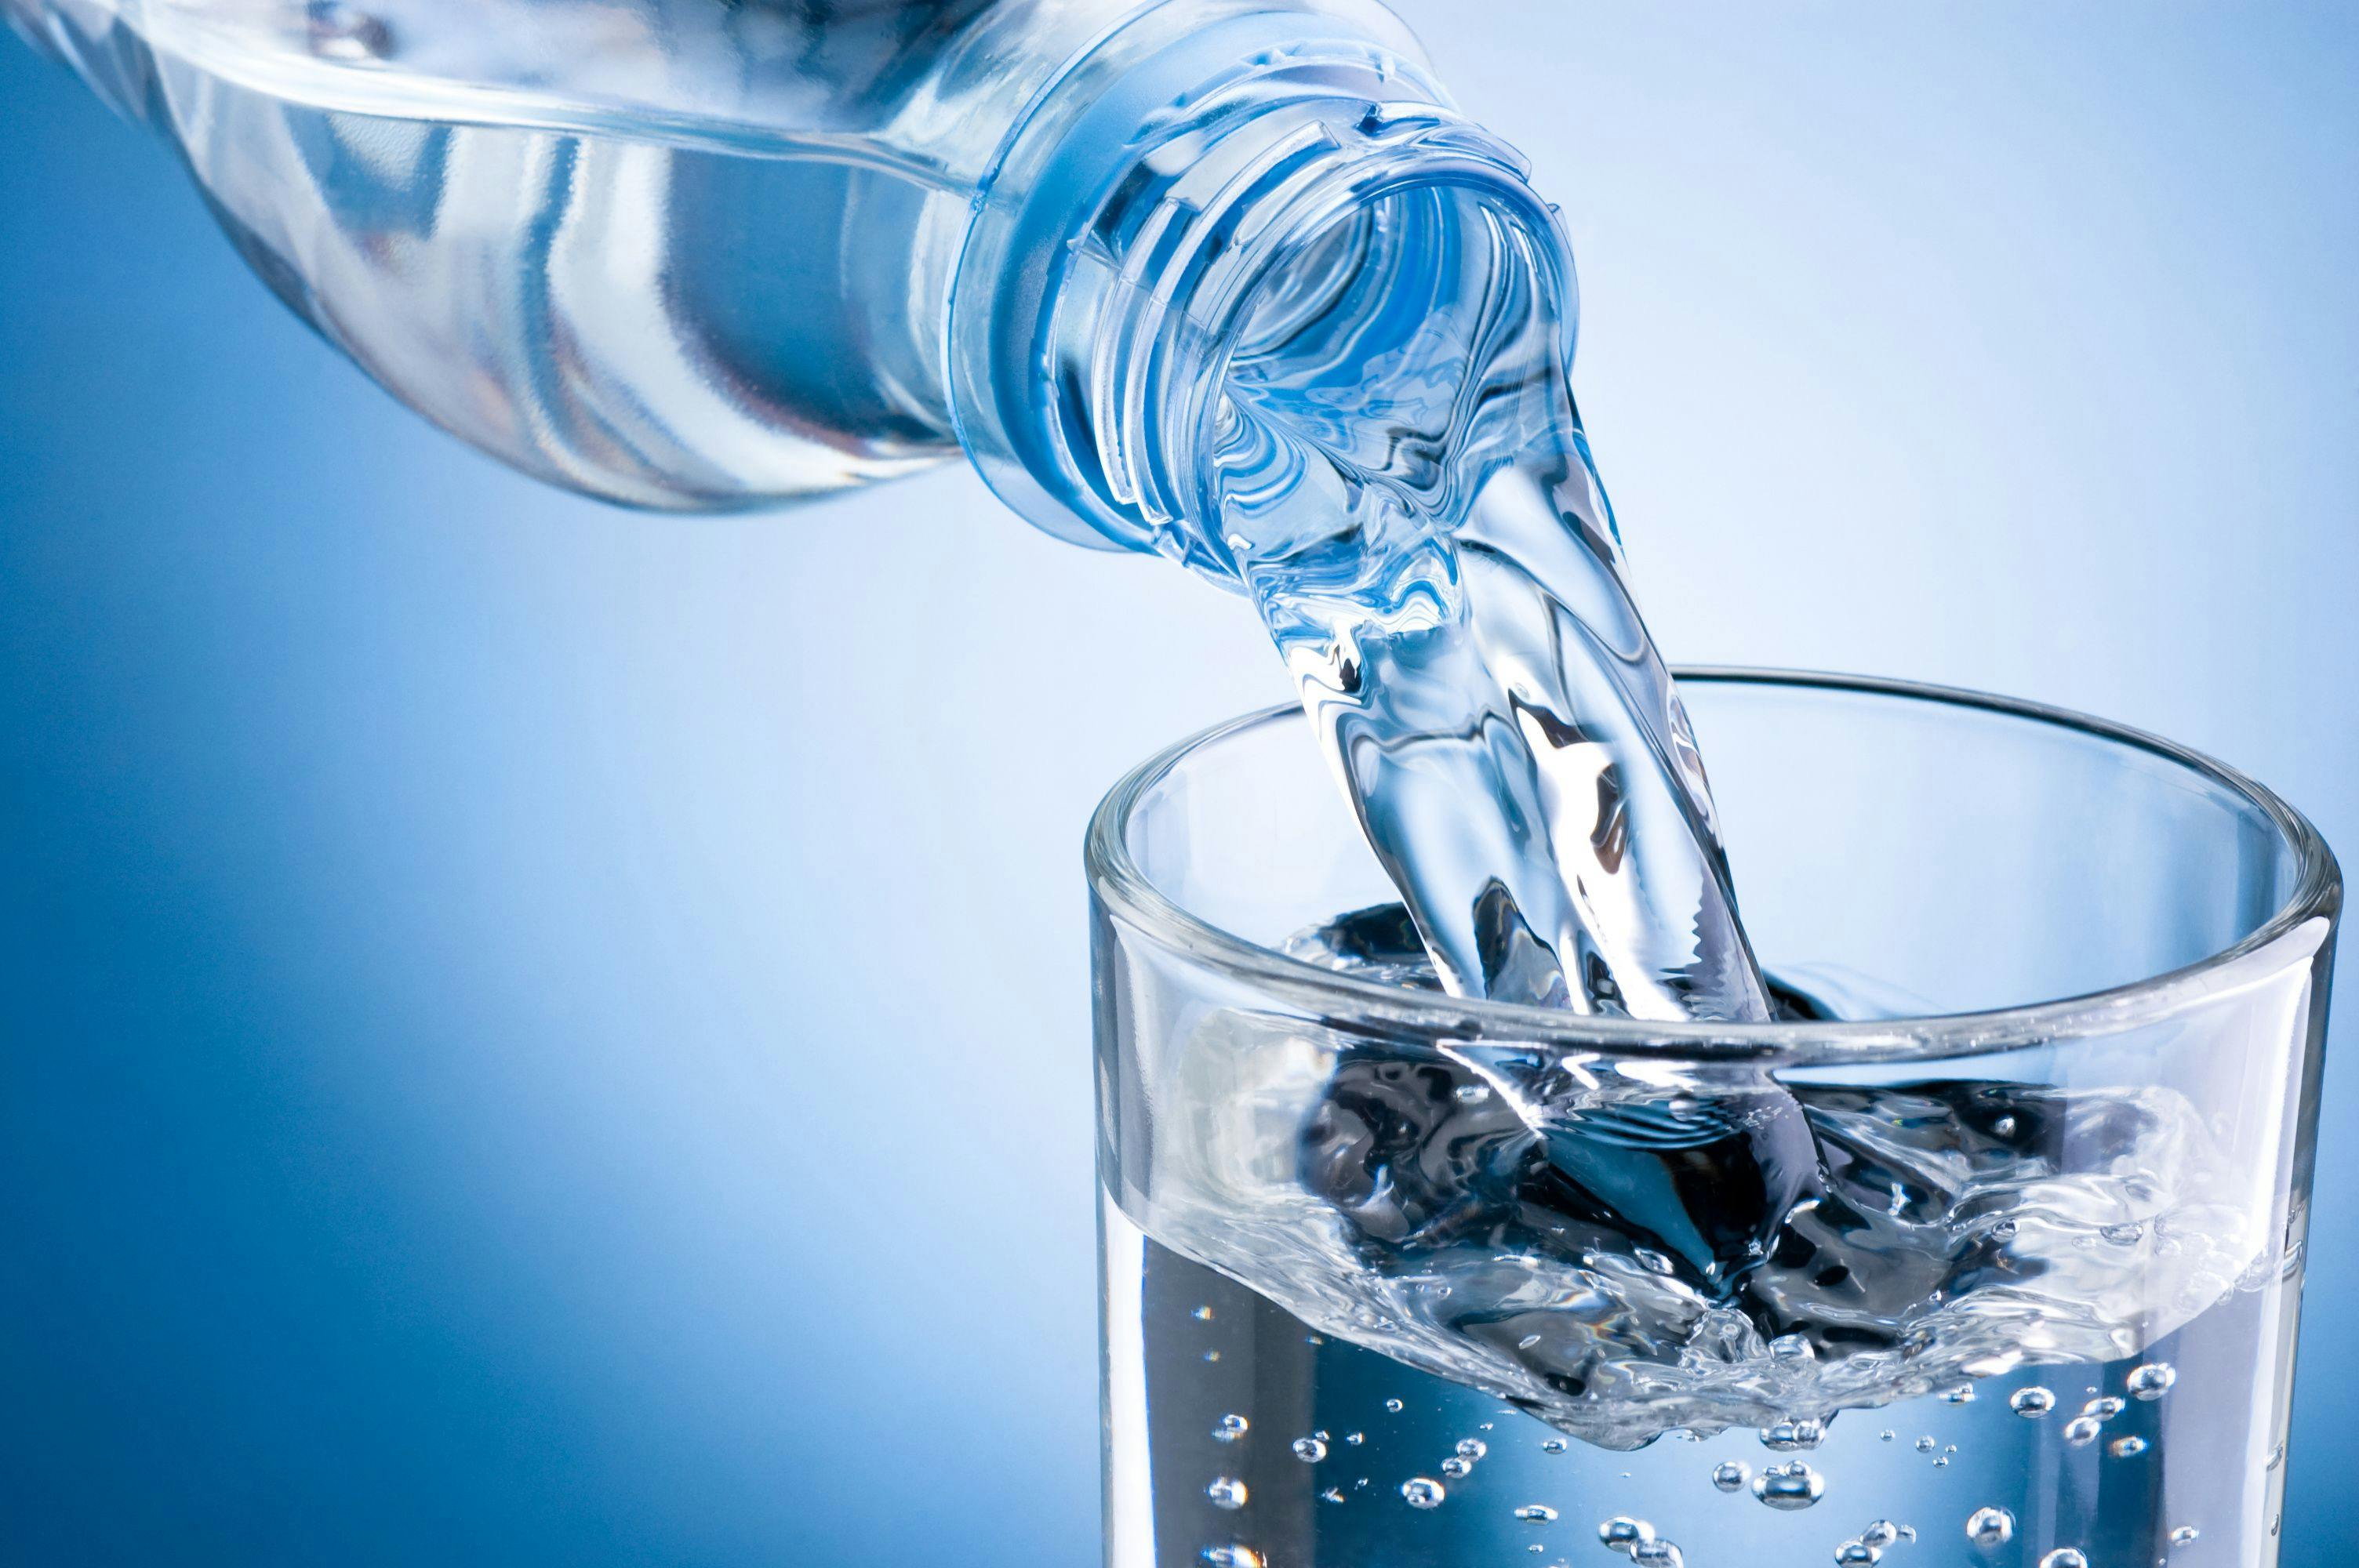 Pouring water from bottle into glass on blue background | Image credit: © Hyrma stock.adobe.com